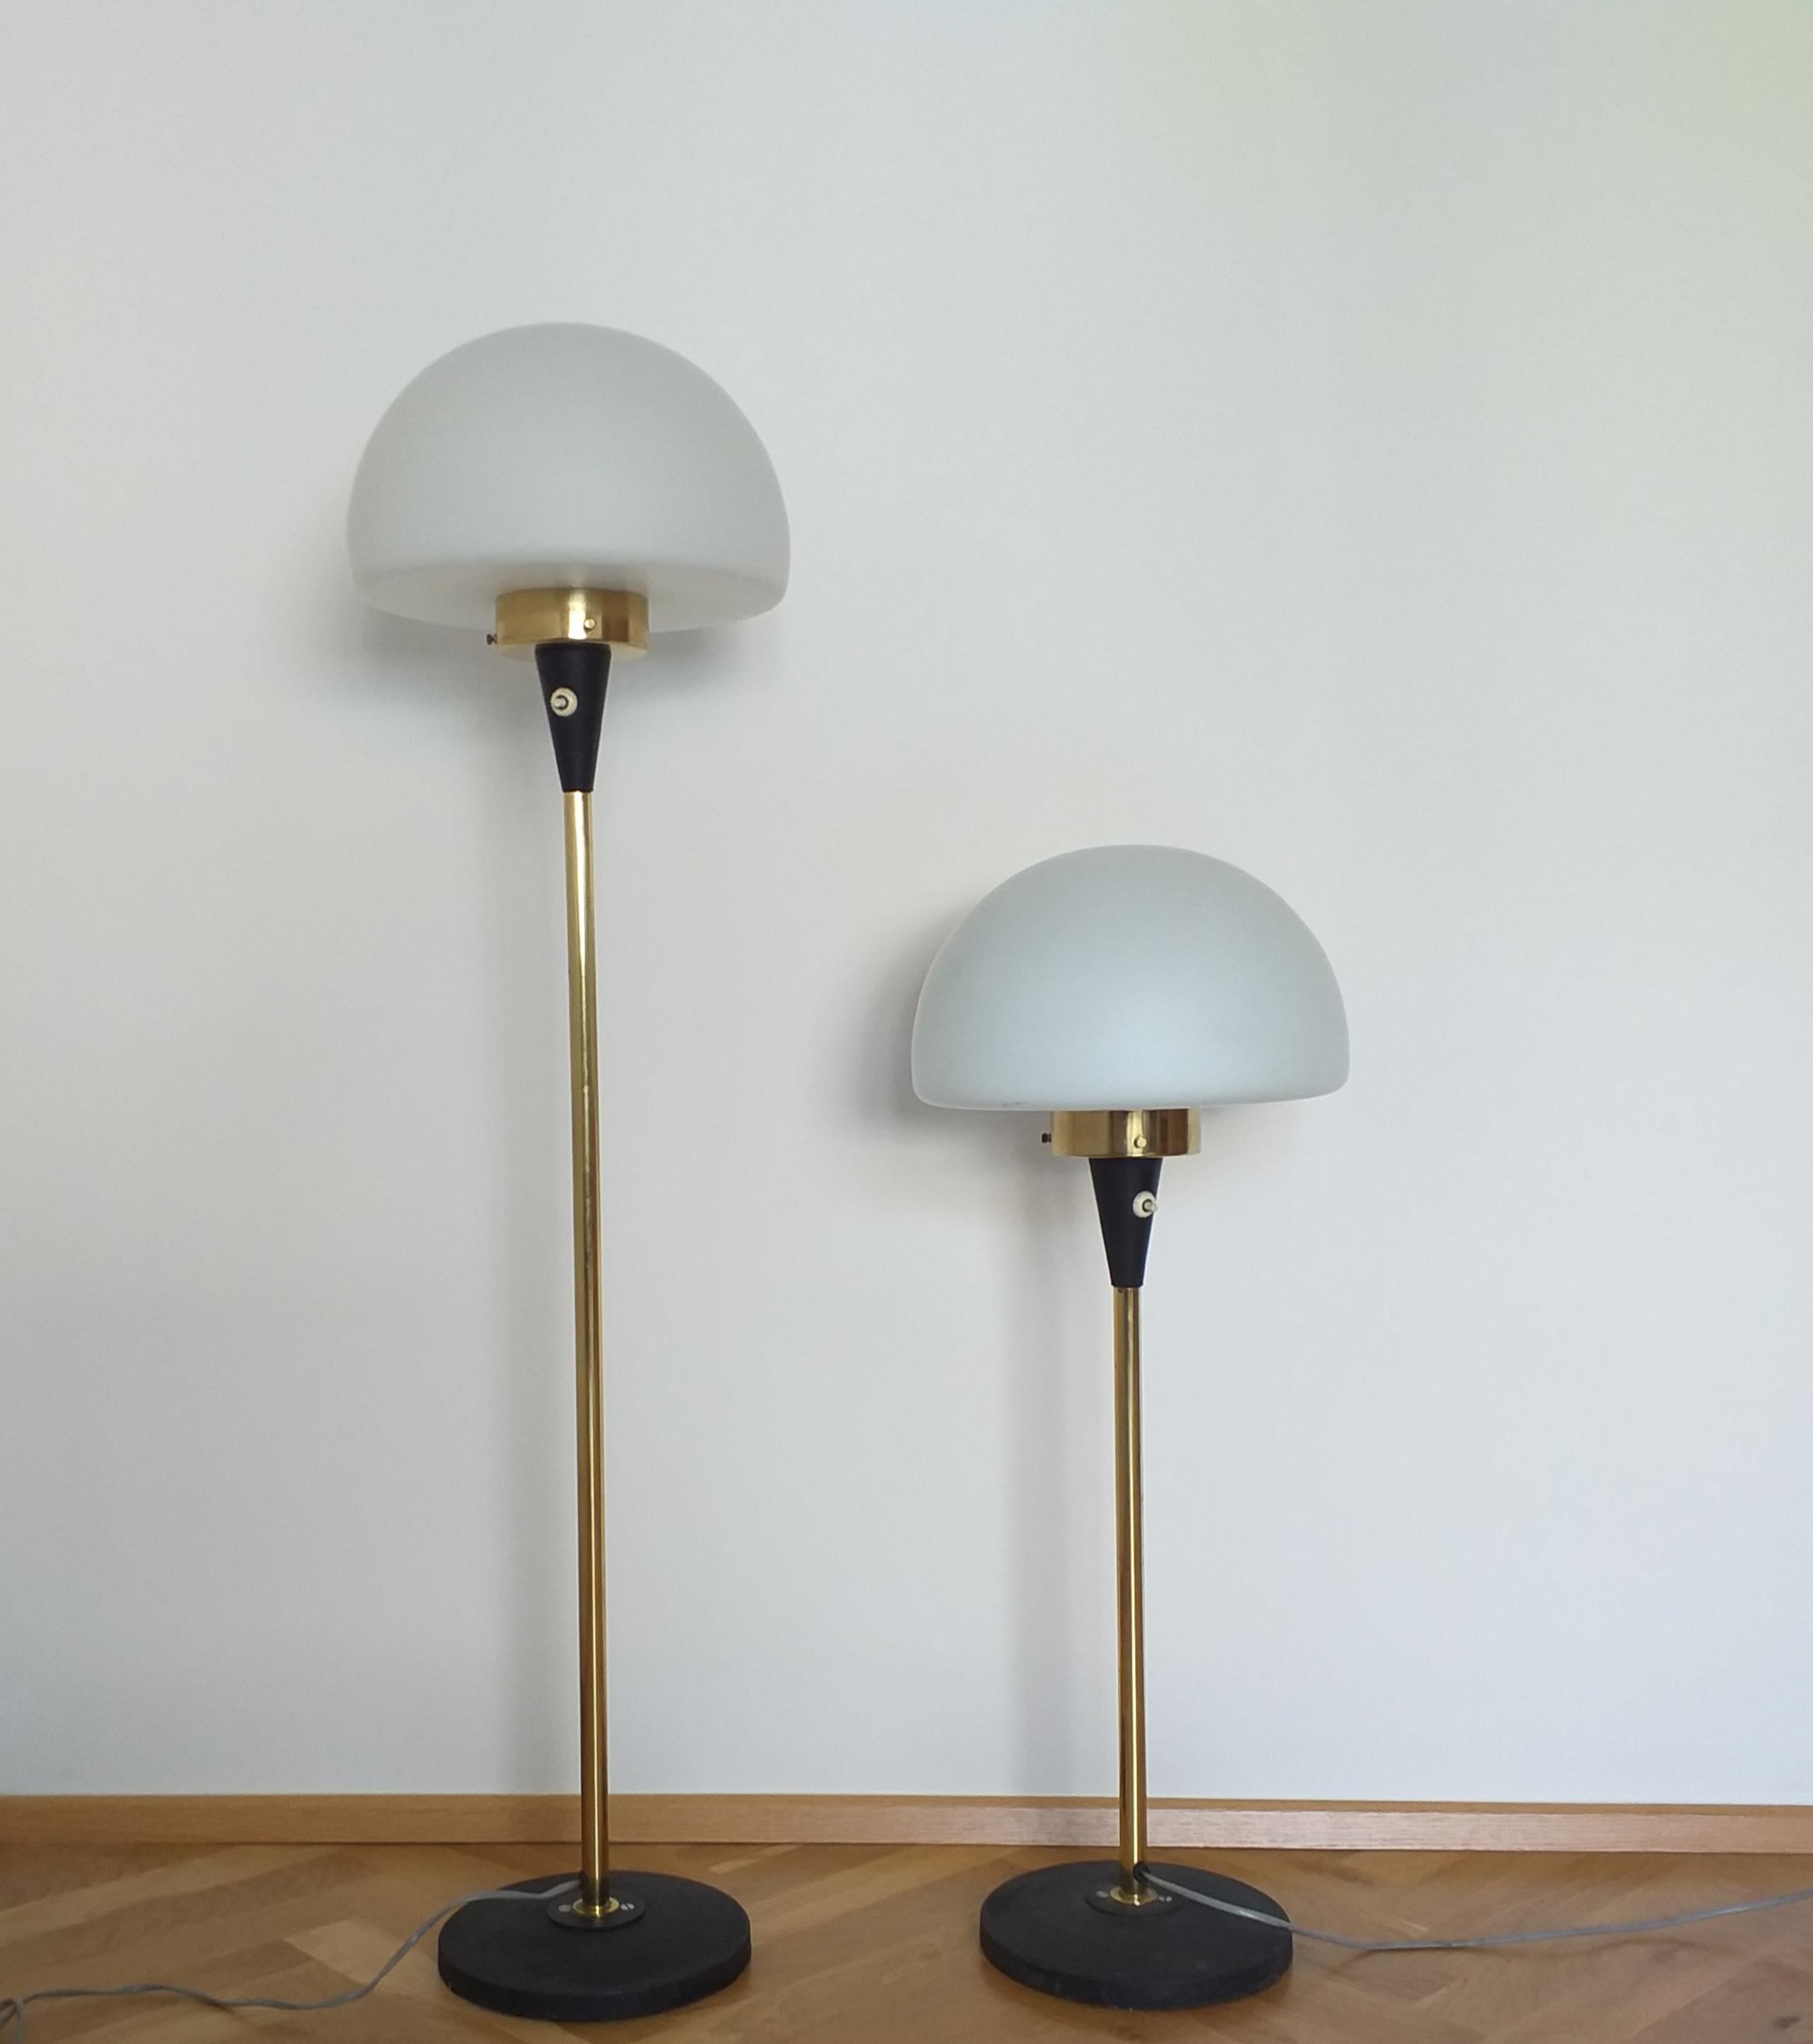 Set of Two Floor Lamps Lidokov Designed by Josef Hurka, 1970s For Sale 6